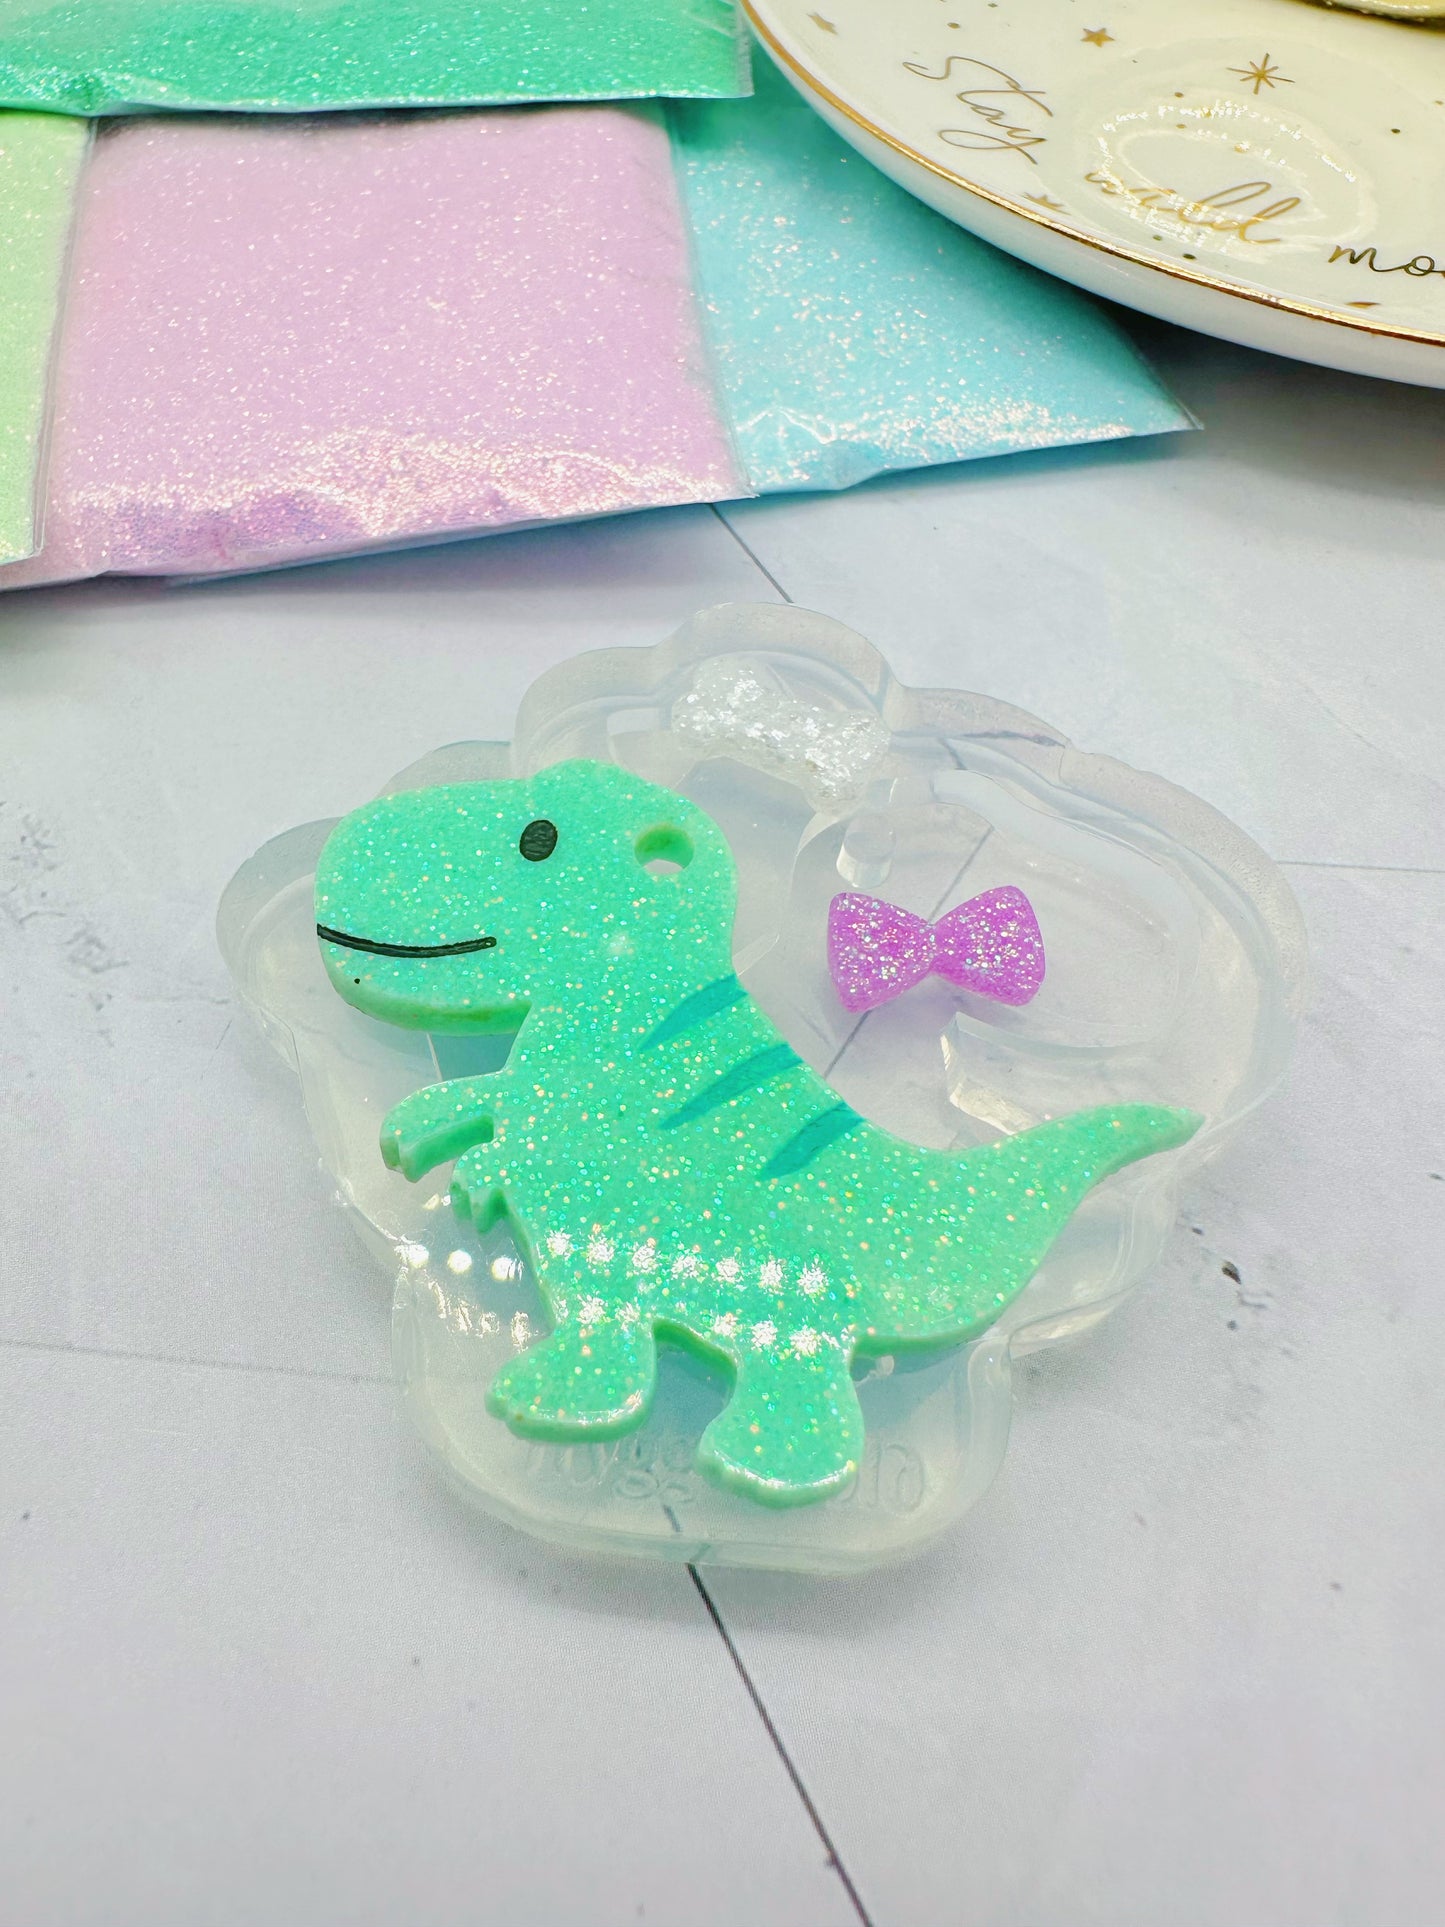 T-Rex Dino with Ribbon Bow and Bone Keychain Mold